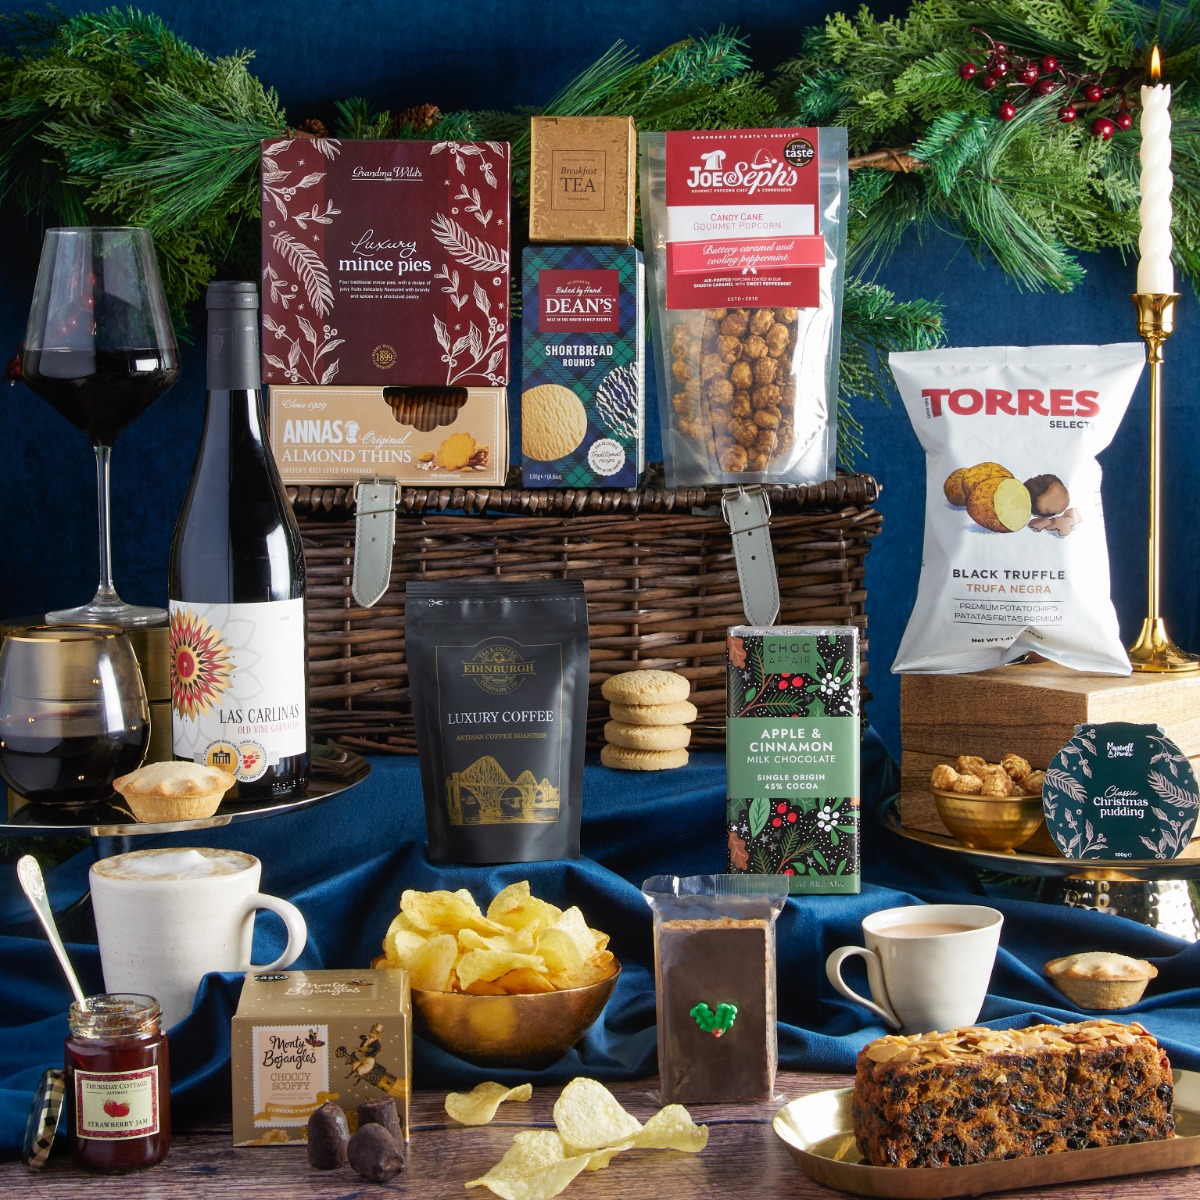  The Magic of Christmas Hamper with contents on display as recommended Christmas gift hamper for neighbours or friends